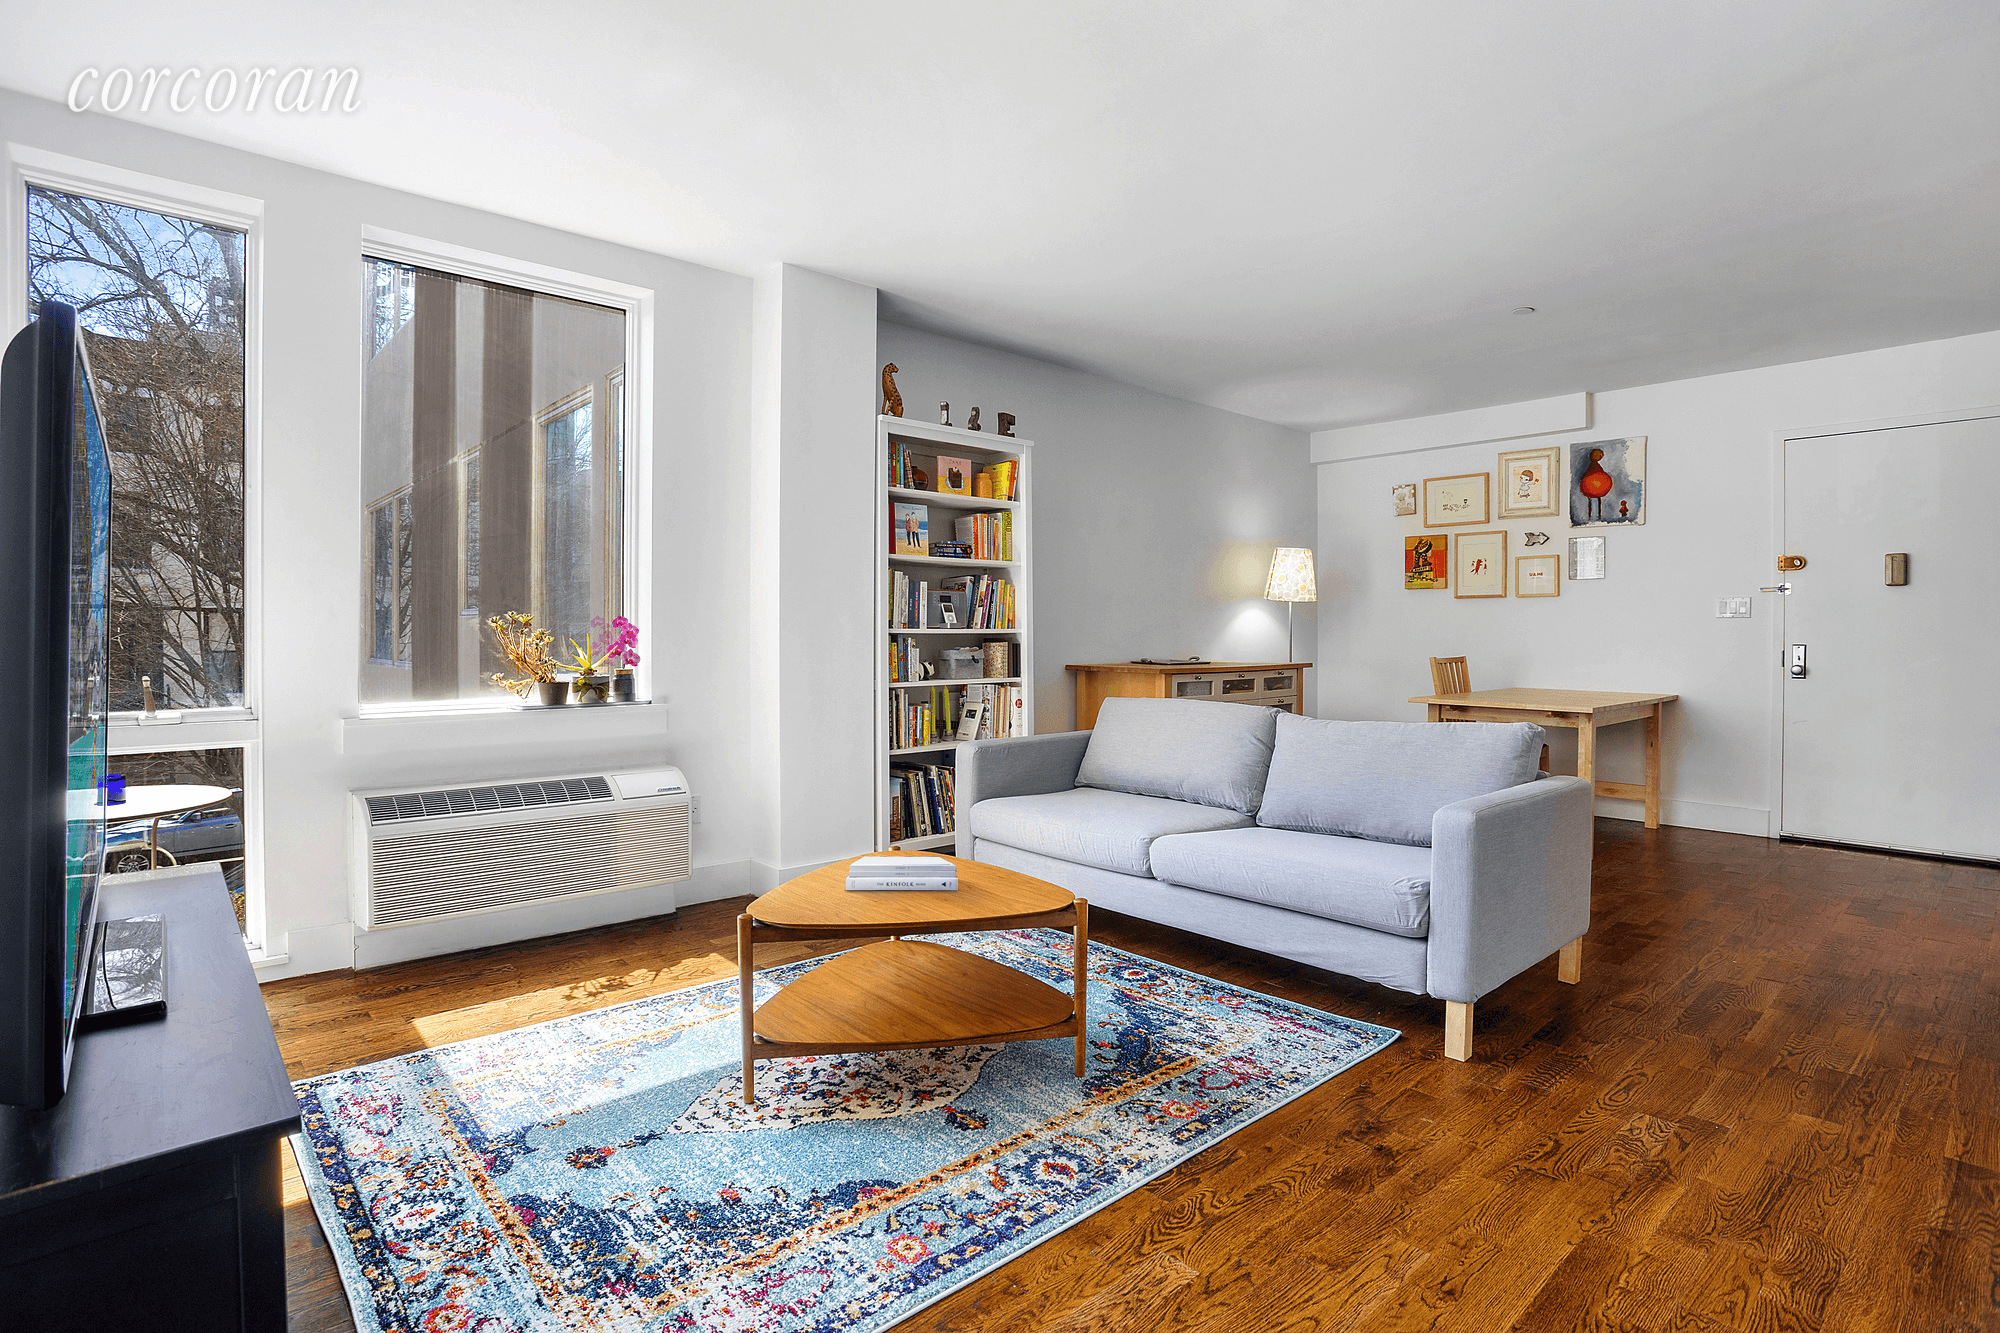 Welcome to 59 Hawthorne Street a boutique condominium in Prospect Lefferts Gardens.